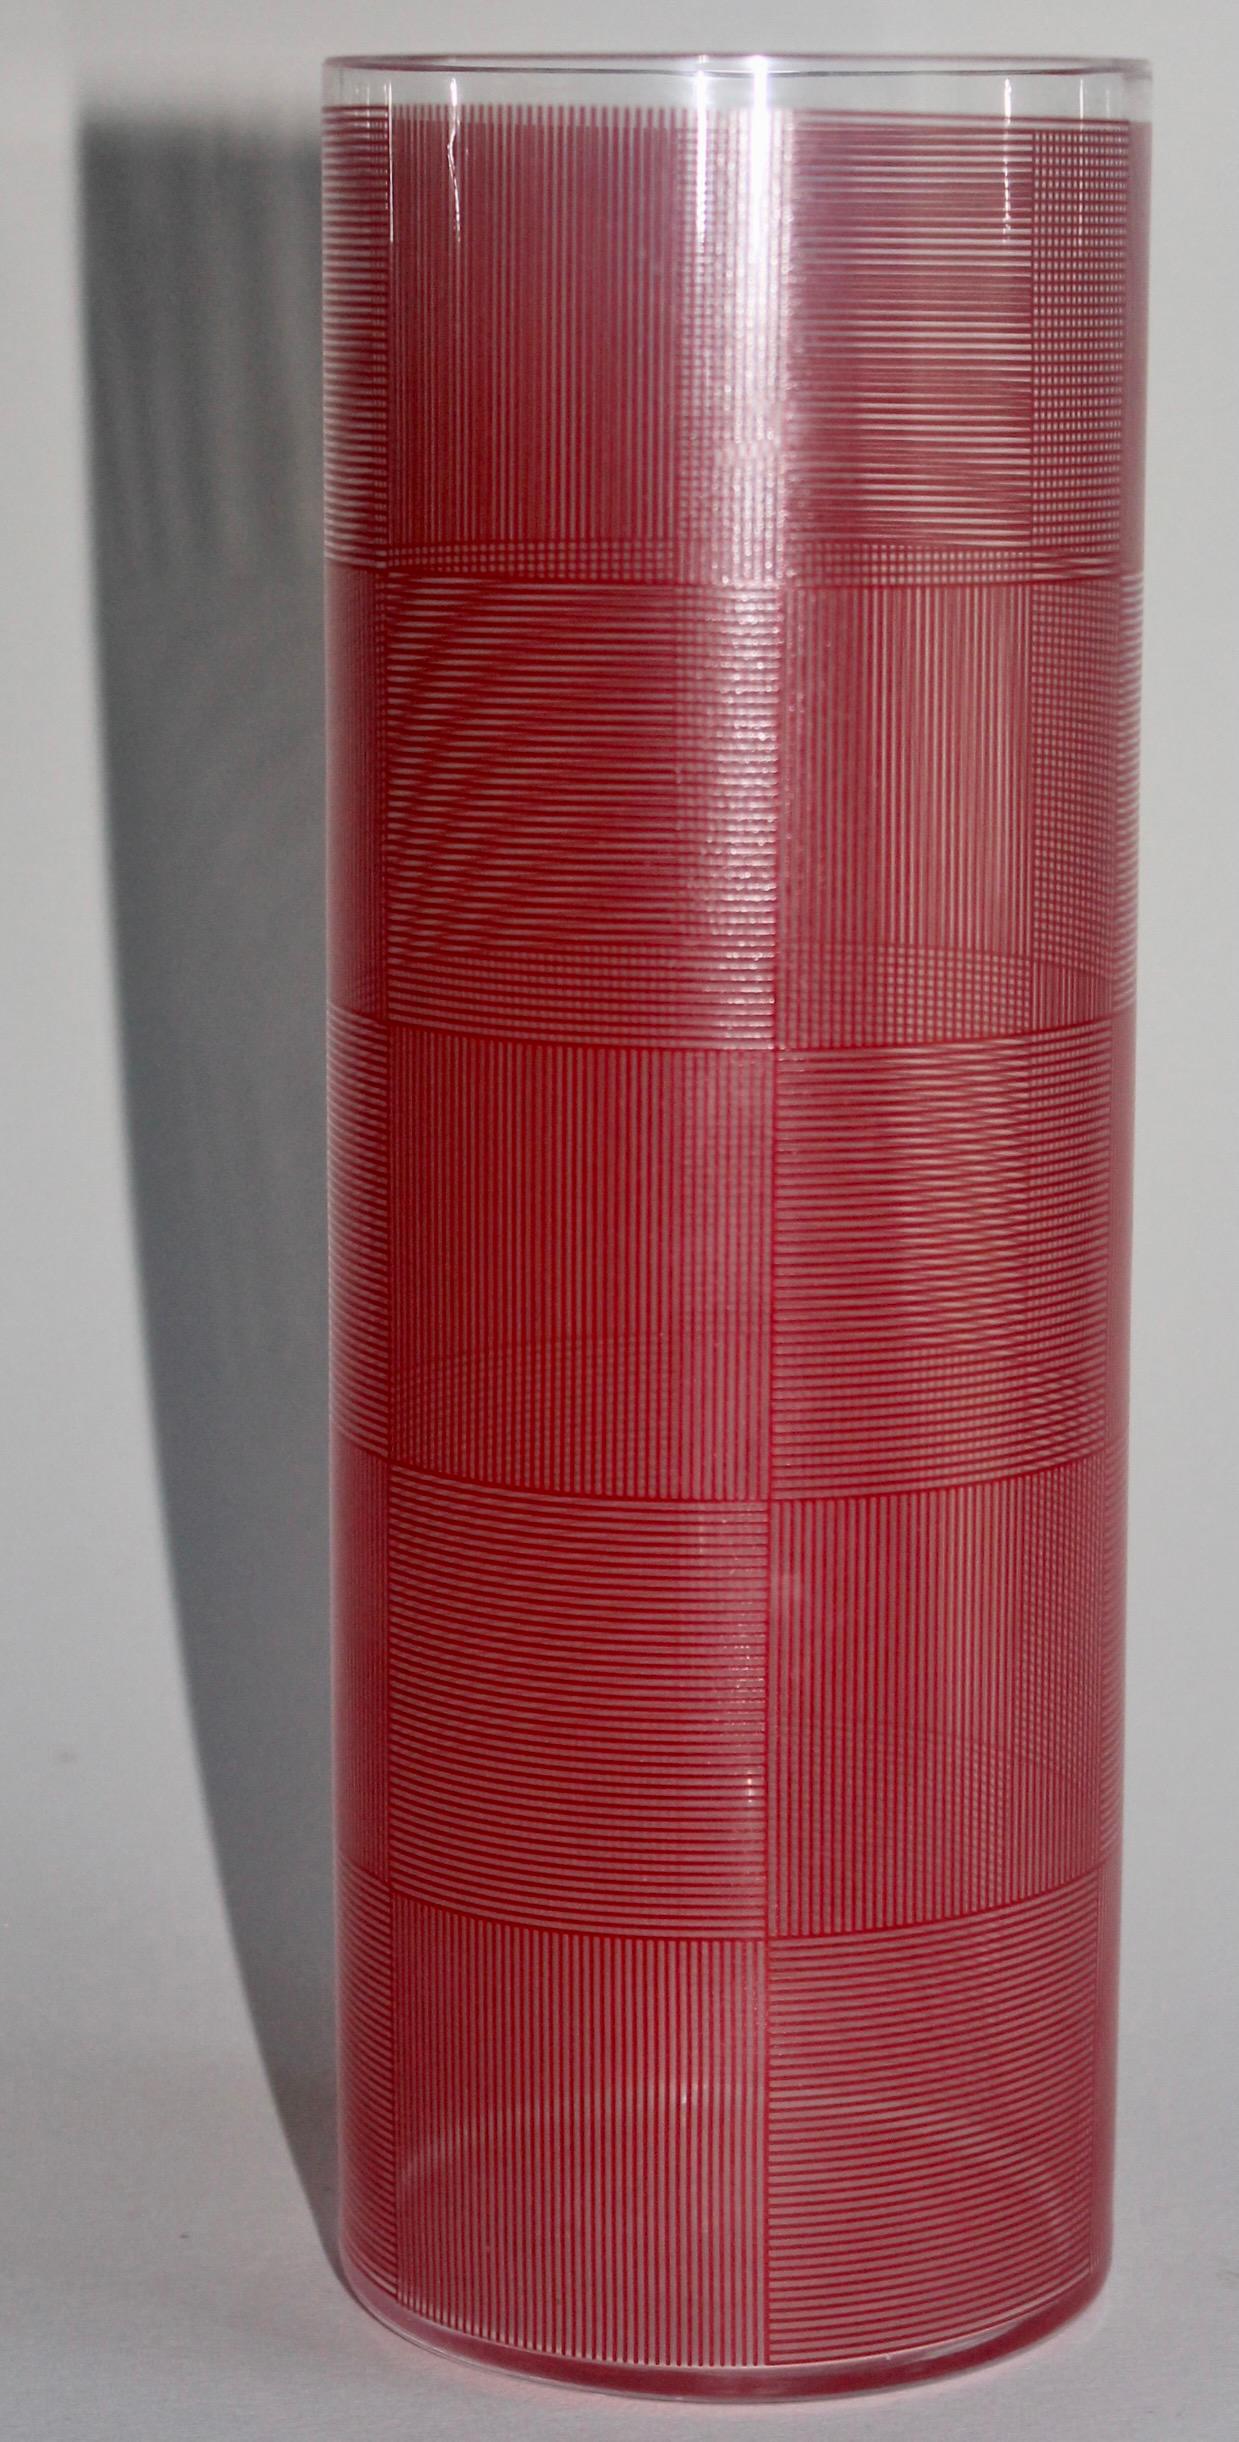 Designed by Sydney Cash, a printed (red) on very thin glass. optical vase published in 2000 by MOMA, The Museum of Modern Art NY.
Sidney Cash is an important contemporary artist working in glass, and is 
represented by The Heller Gallery NYC.